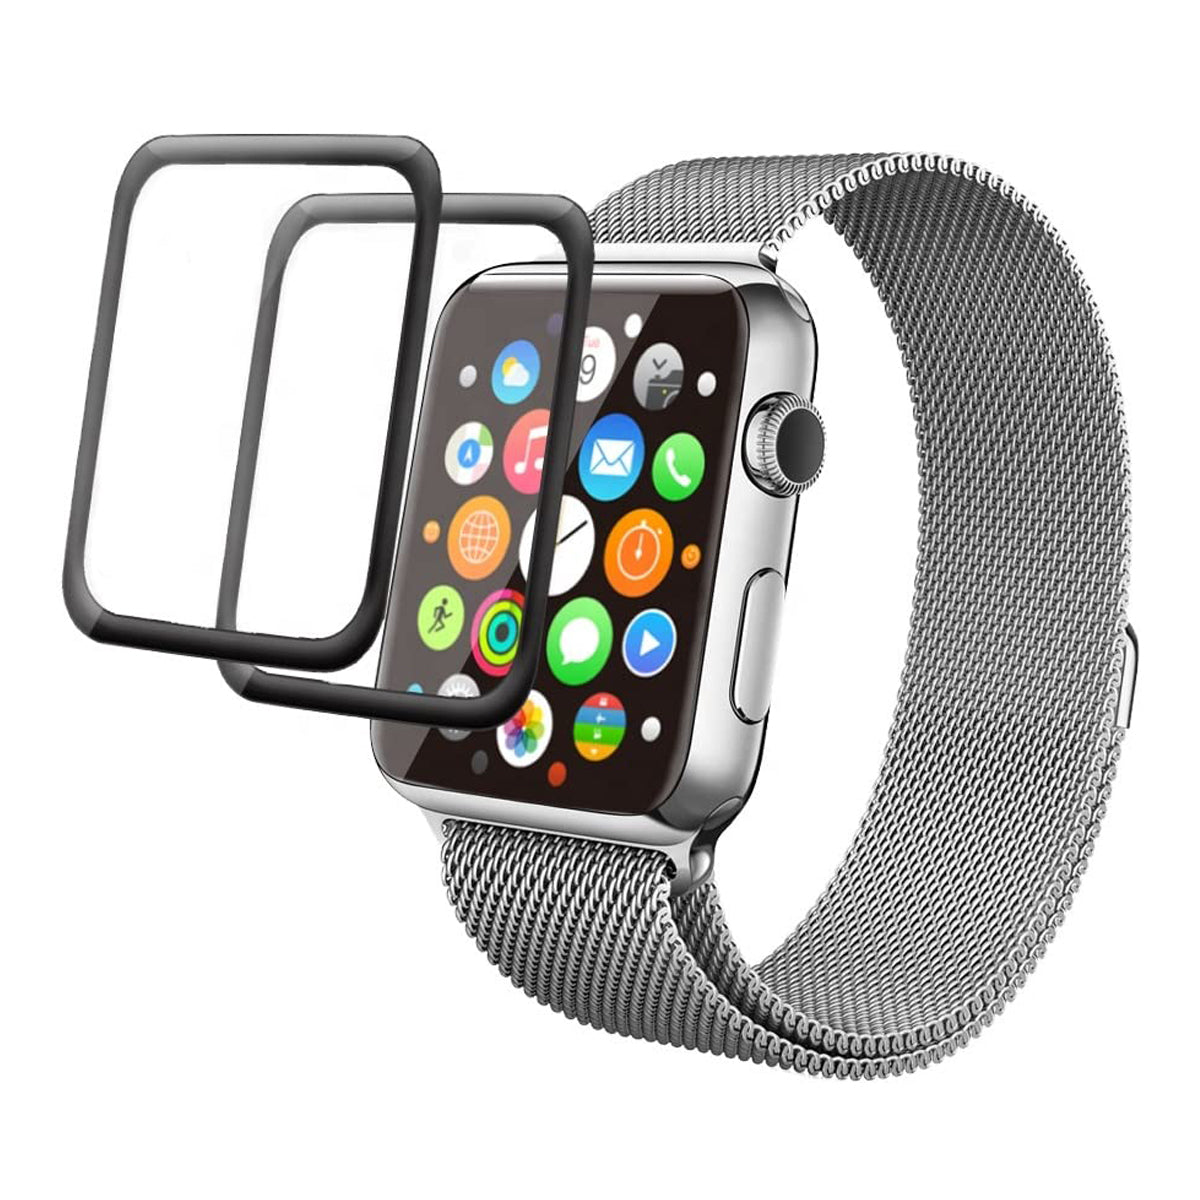 Tempered Glass Compatible with iWatch 44mm, Hard Protective Face Cover for iWatch 44mm